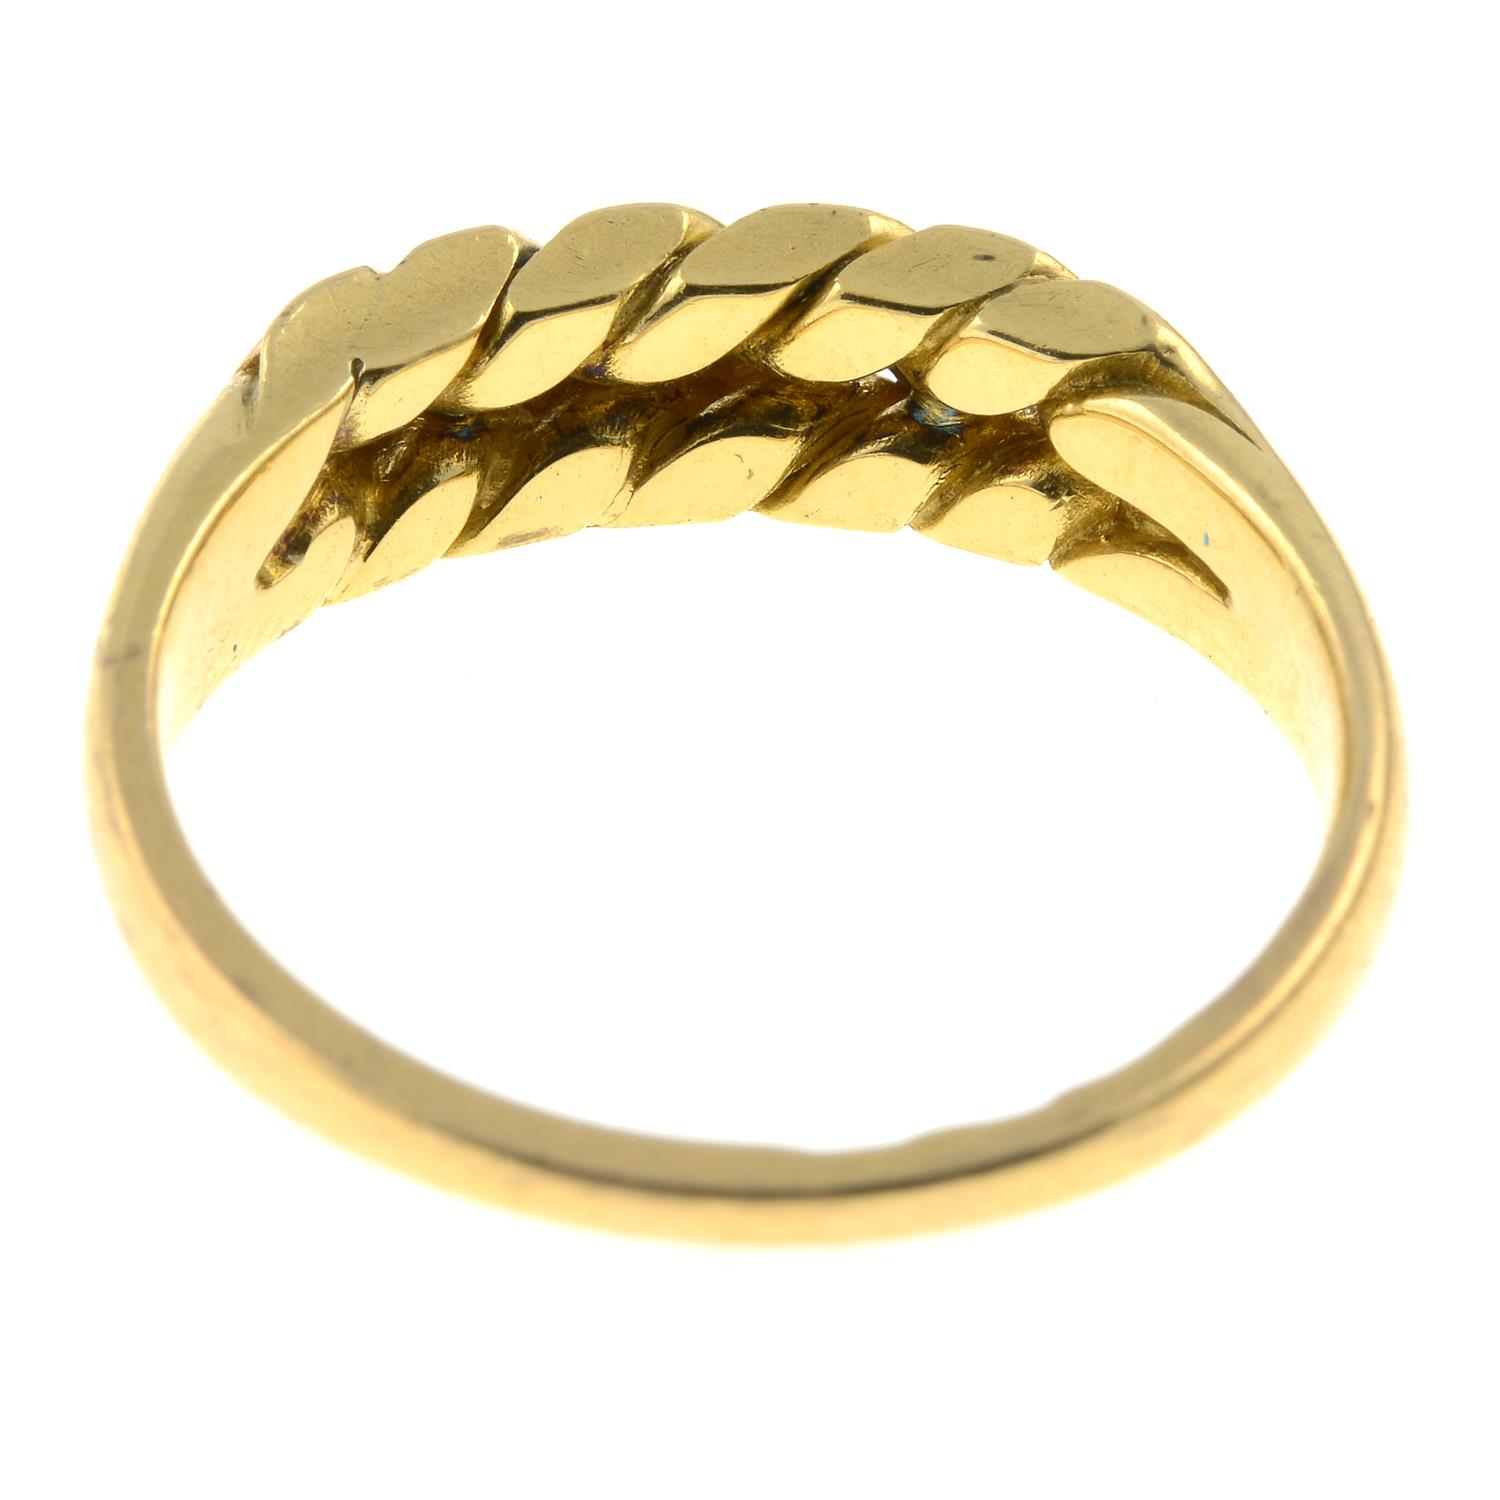 An Edwardian 18ct gold dress ring.Hallmarks for Chester, 1902. - Image 2 of 2